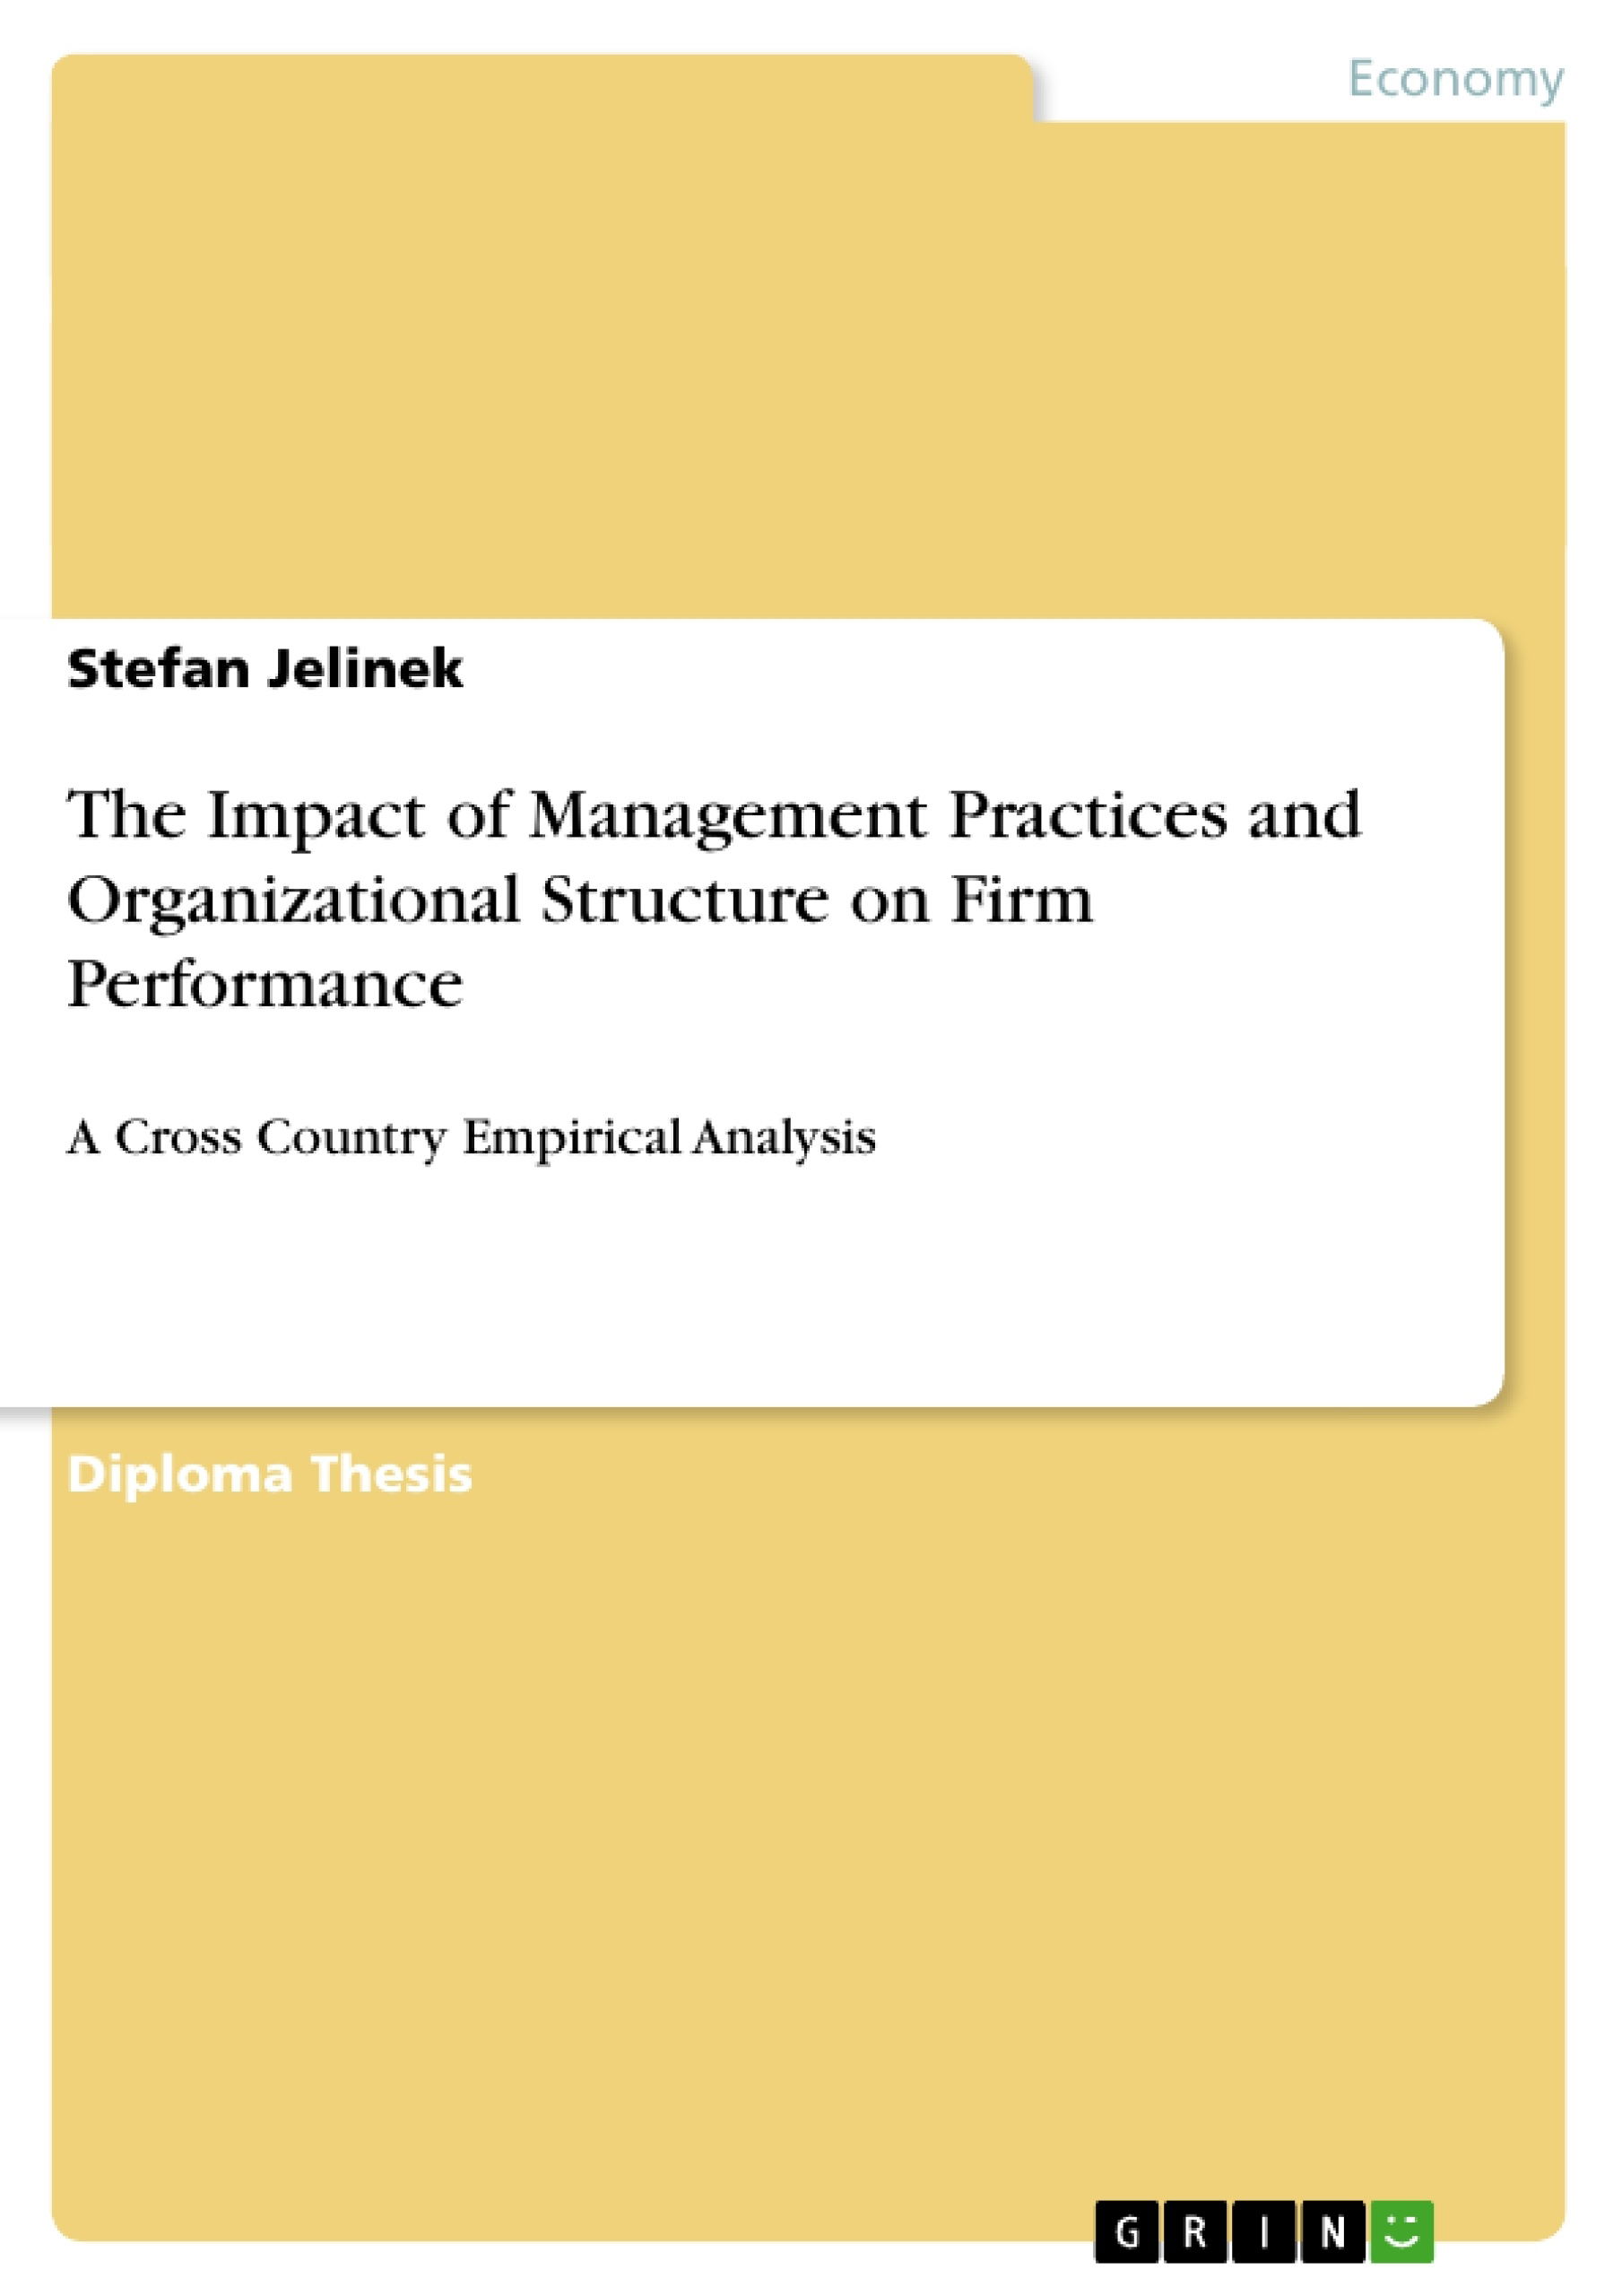 The Impact of Management Practices and Organizational Structure on Firm Performance - A Cross Country Empirical Analysis